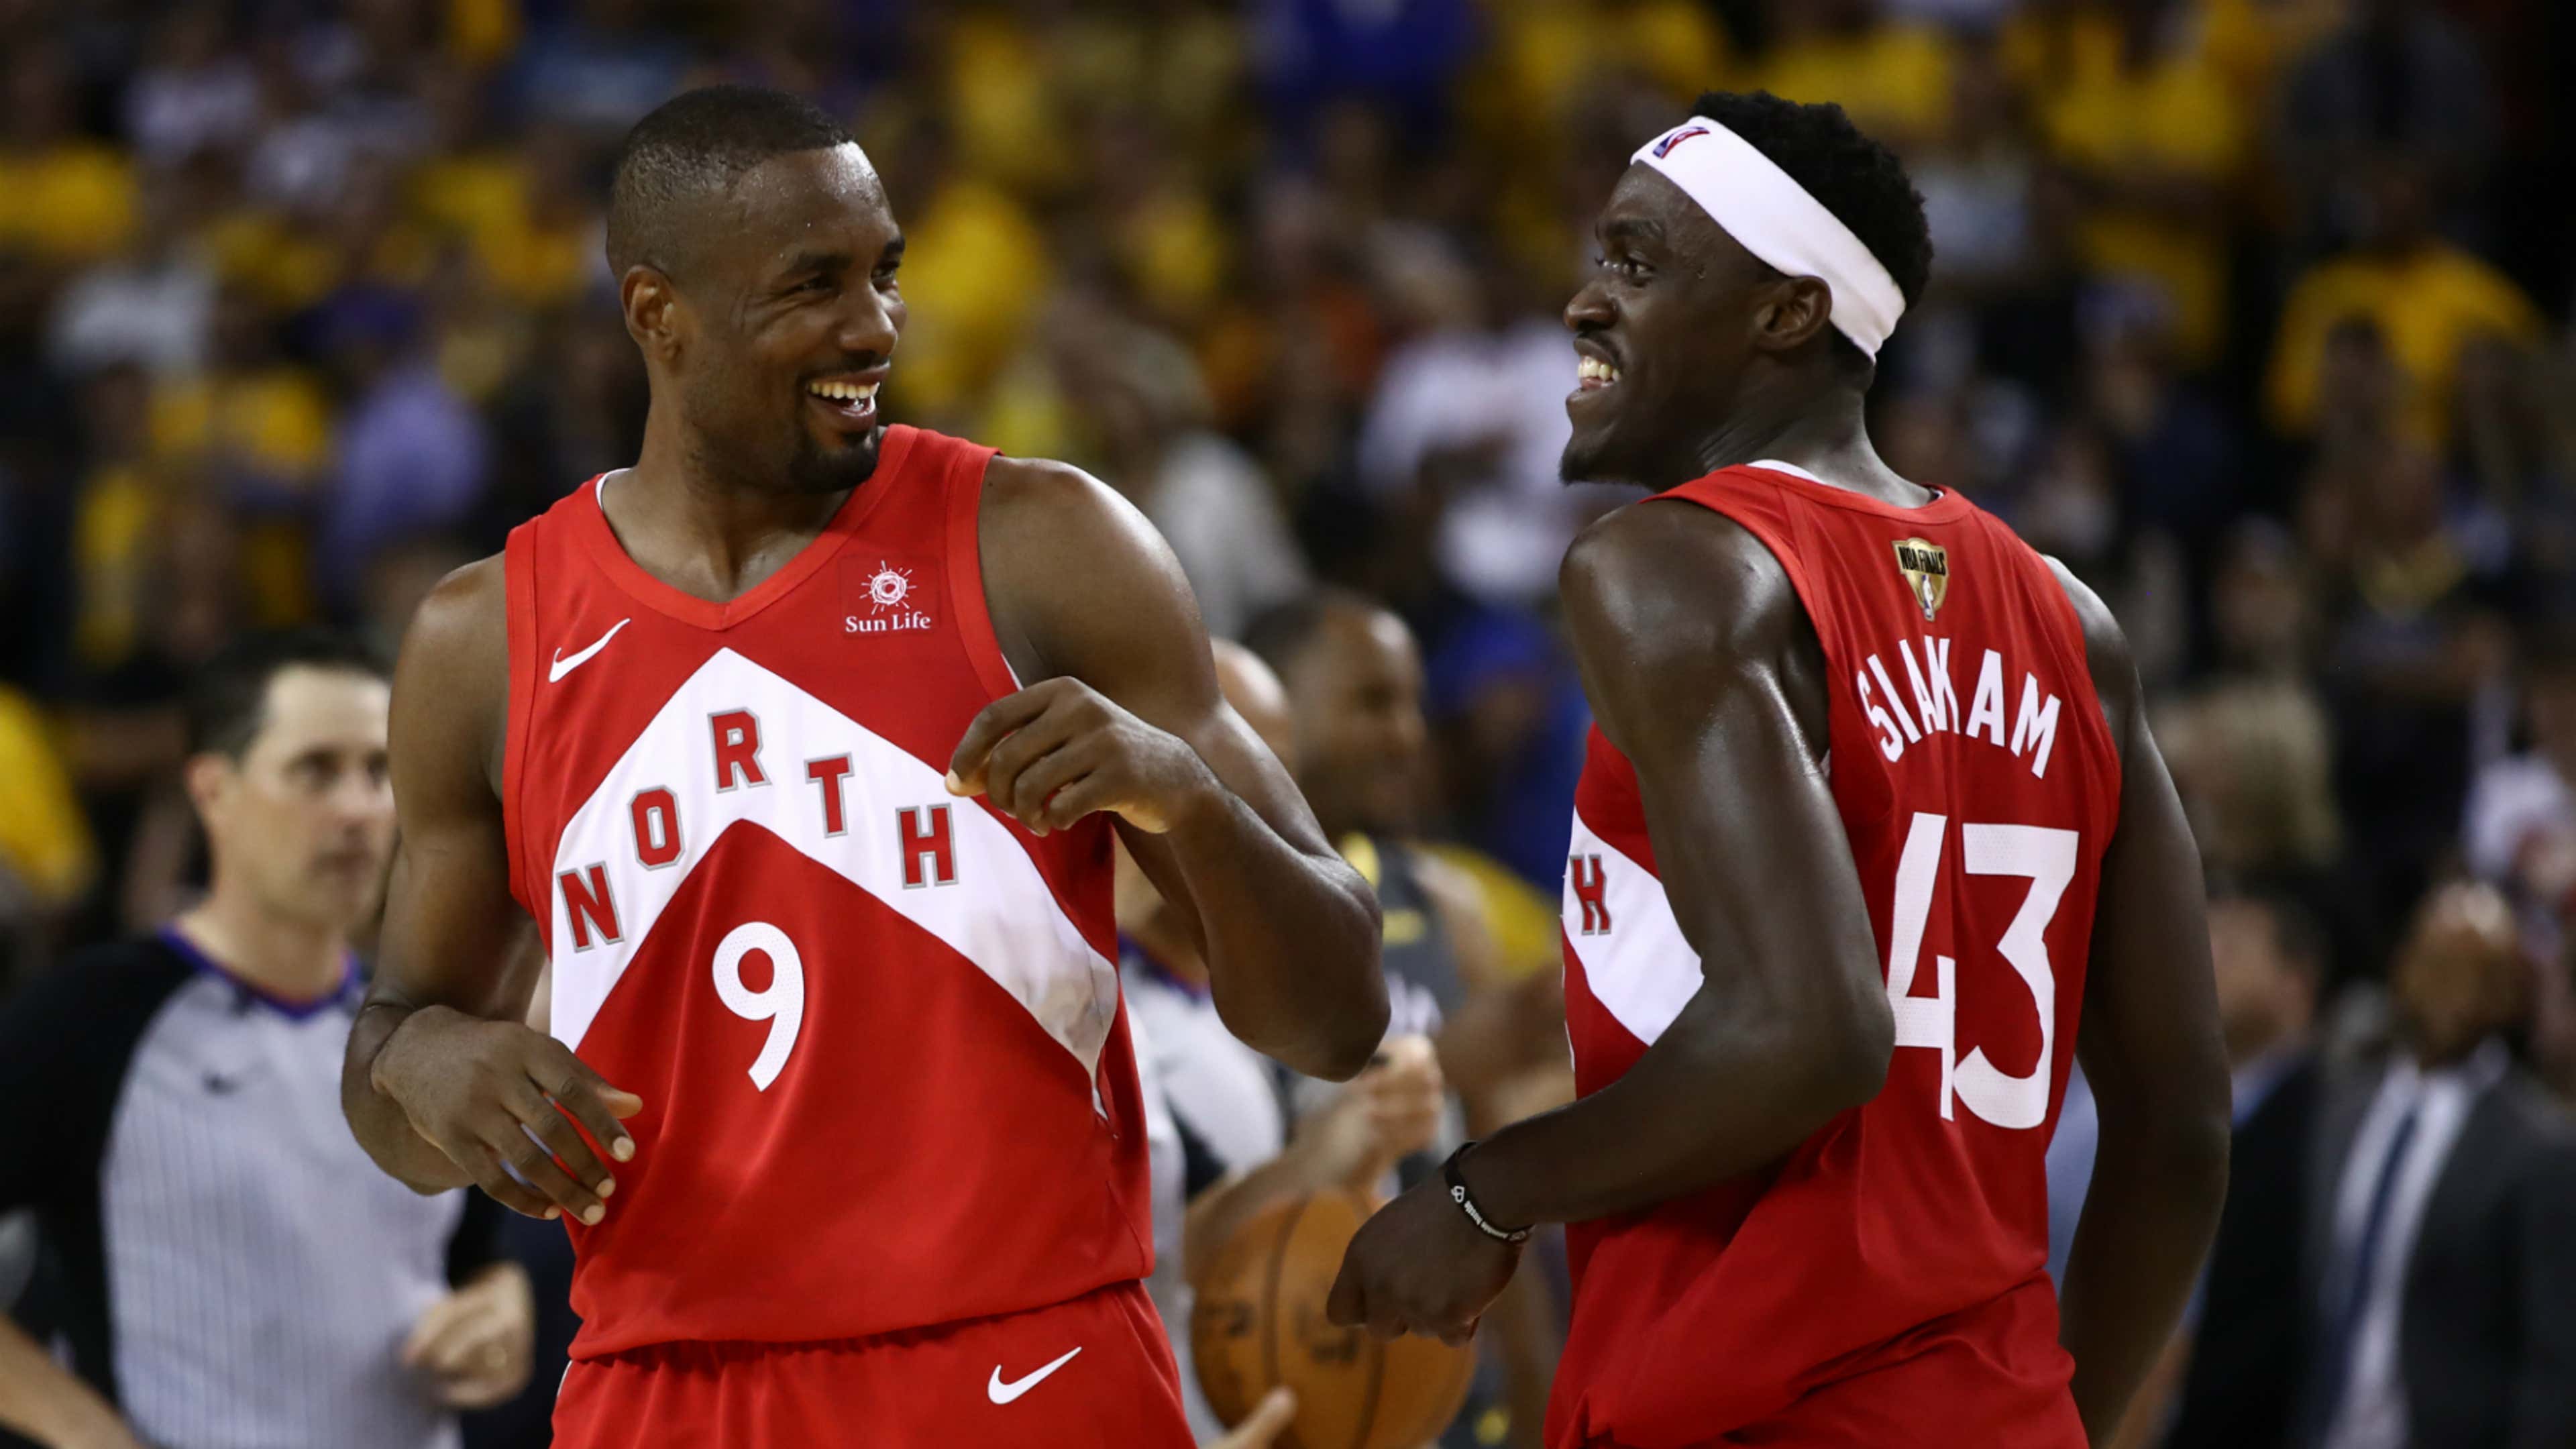 Toronto Raptors win maiden NBA championship with Game 6 victory